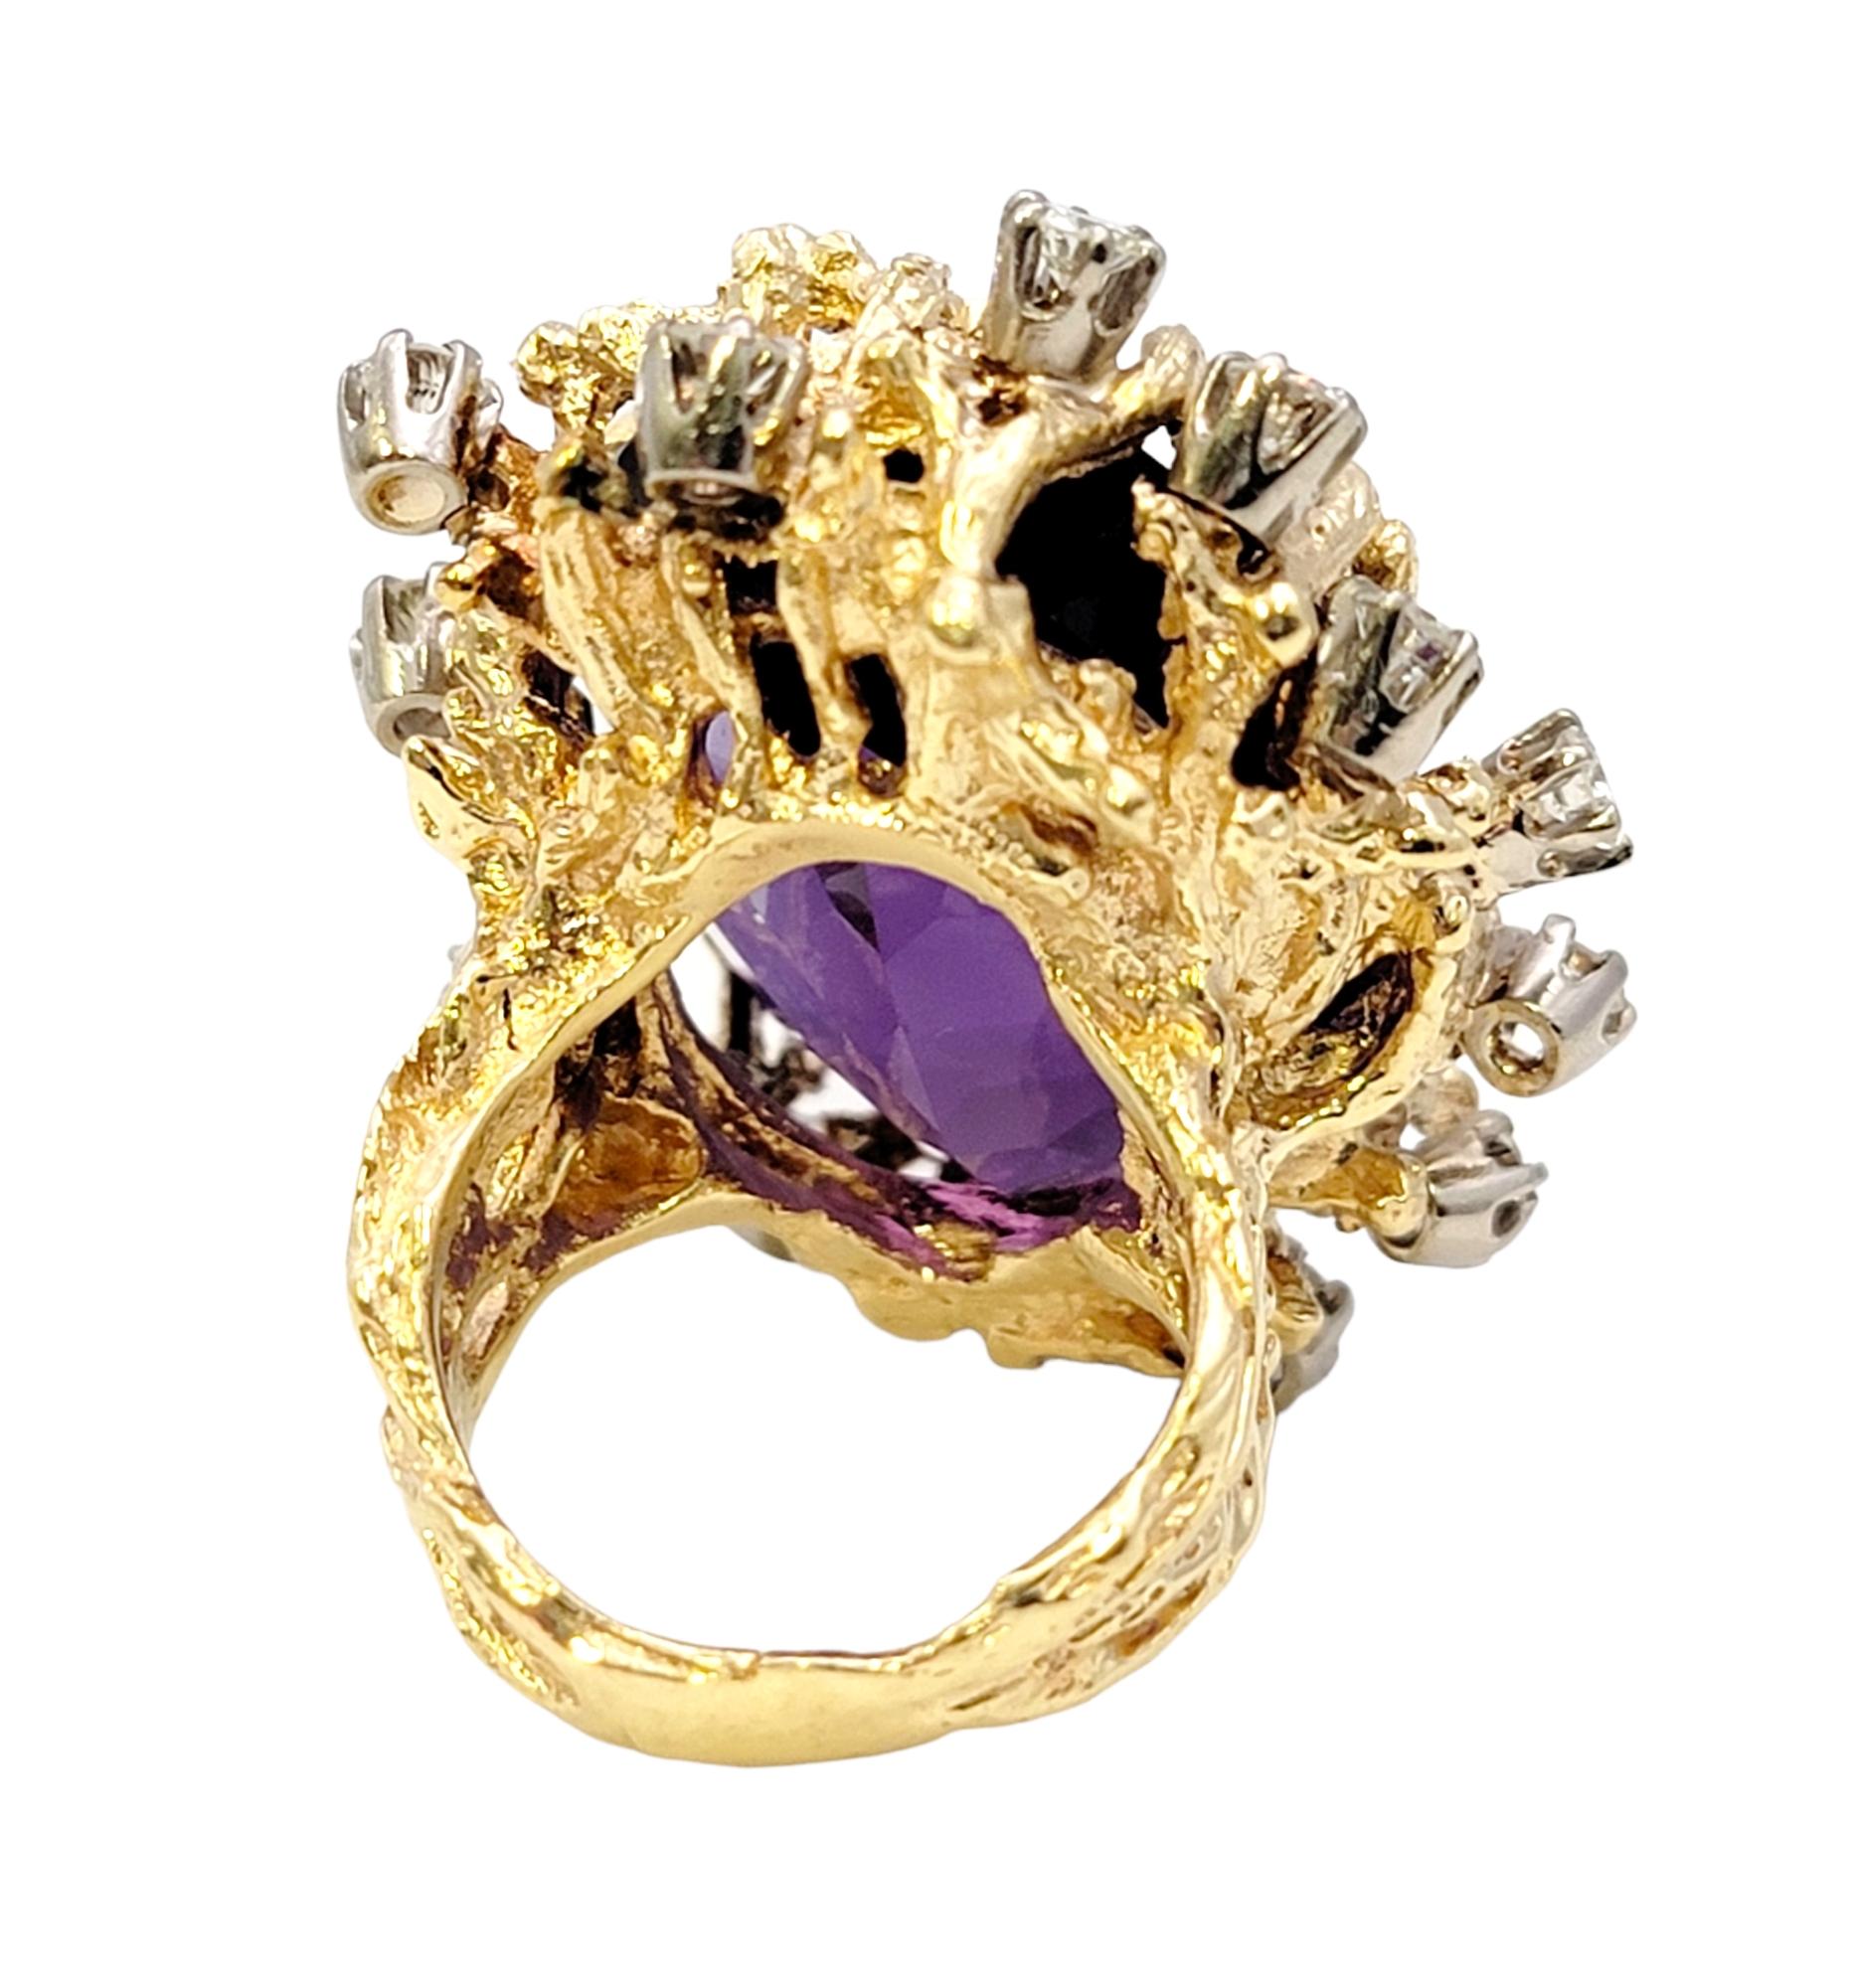 Bold Large Oval Amethyst and Diamond Ring in 14 Karat Gold Coral Motif Design For Sale 2